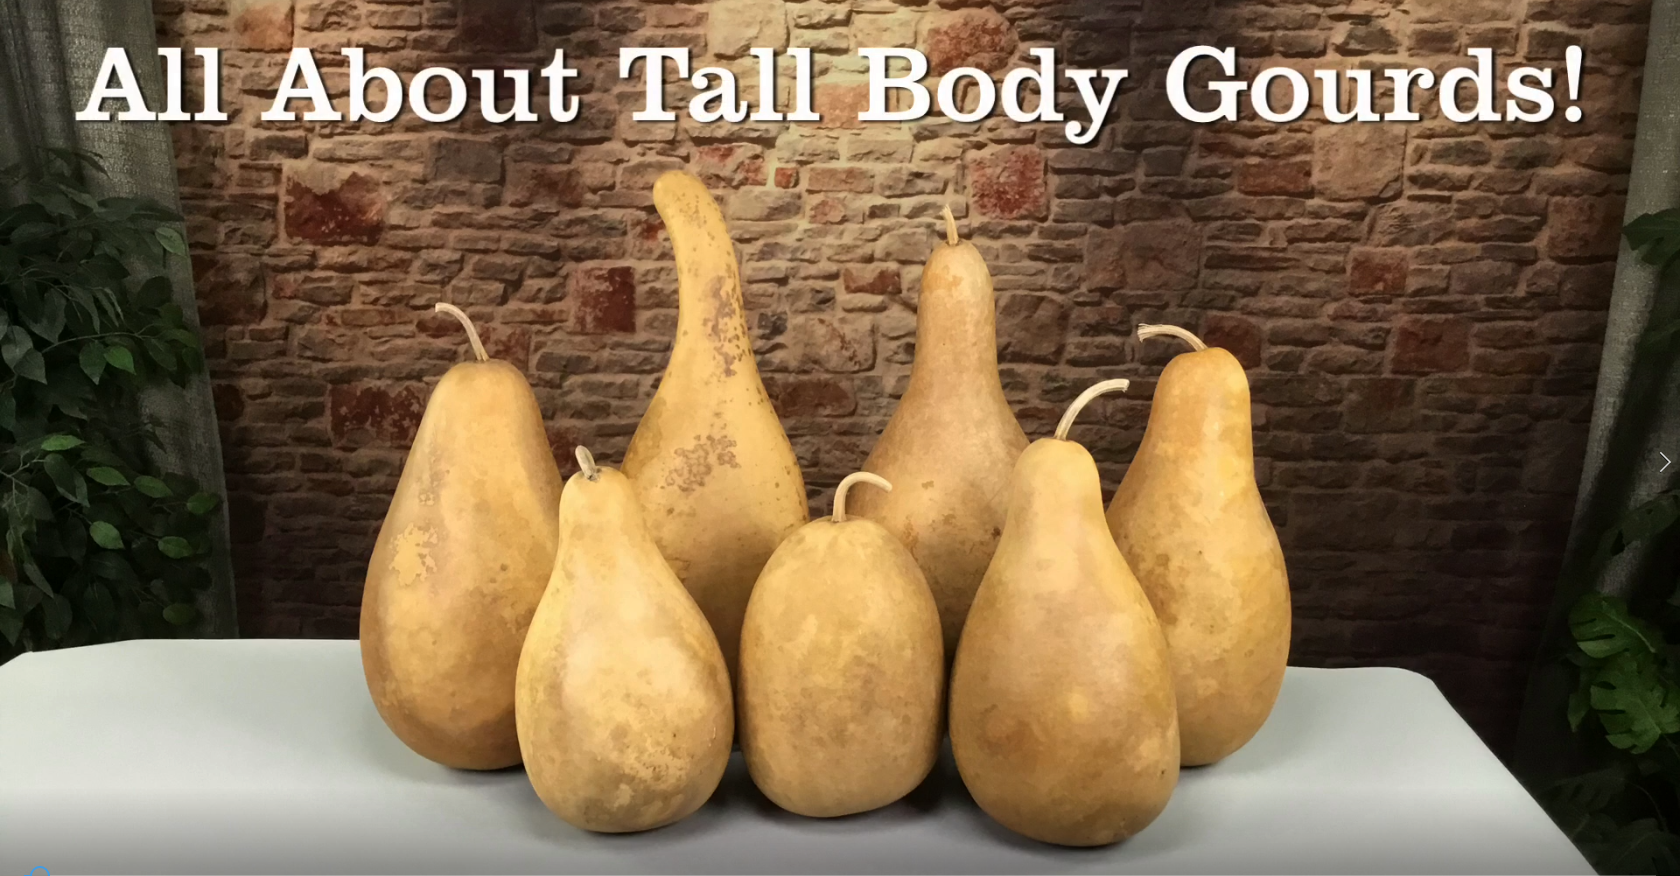 How Tall Body Gourds are Selected